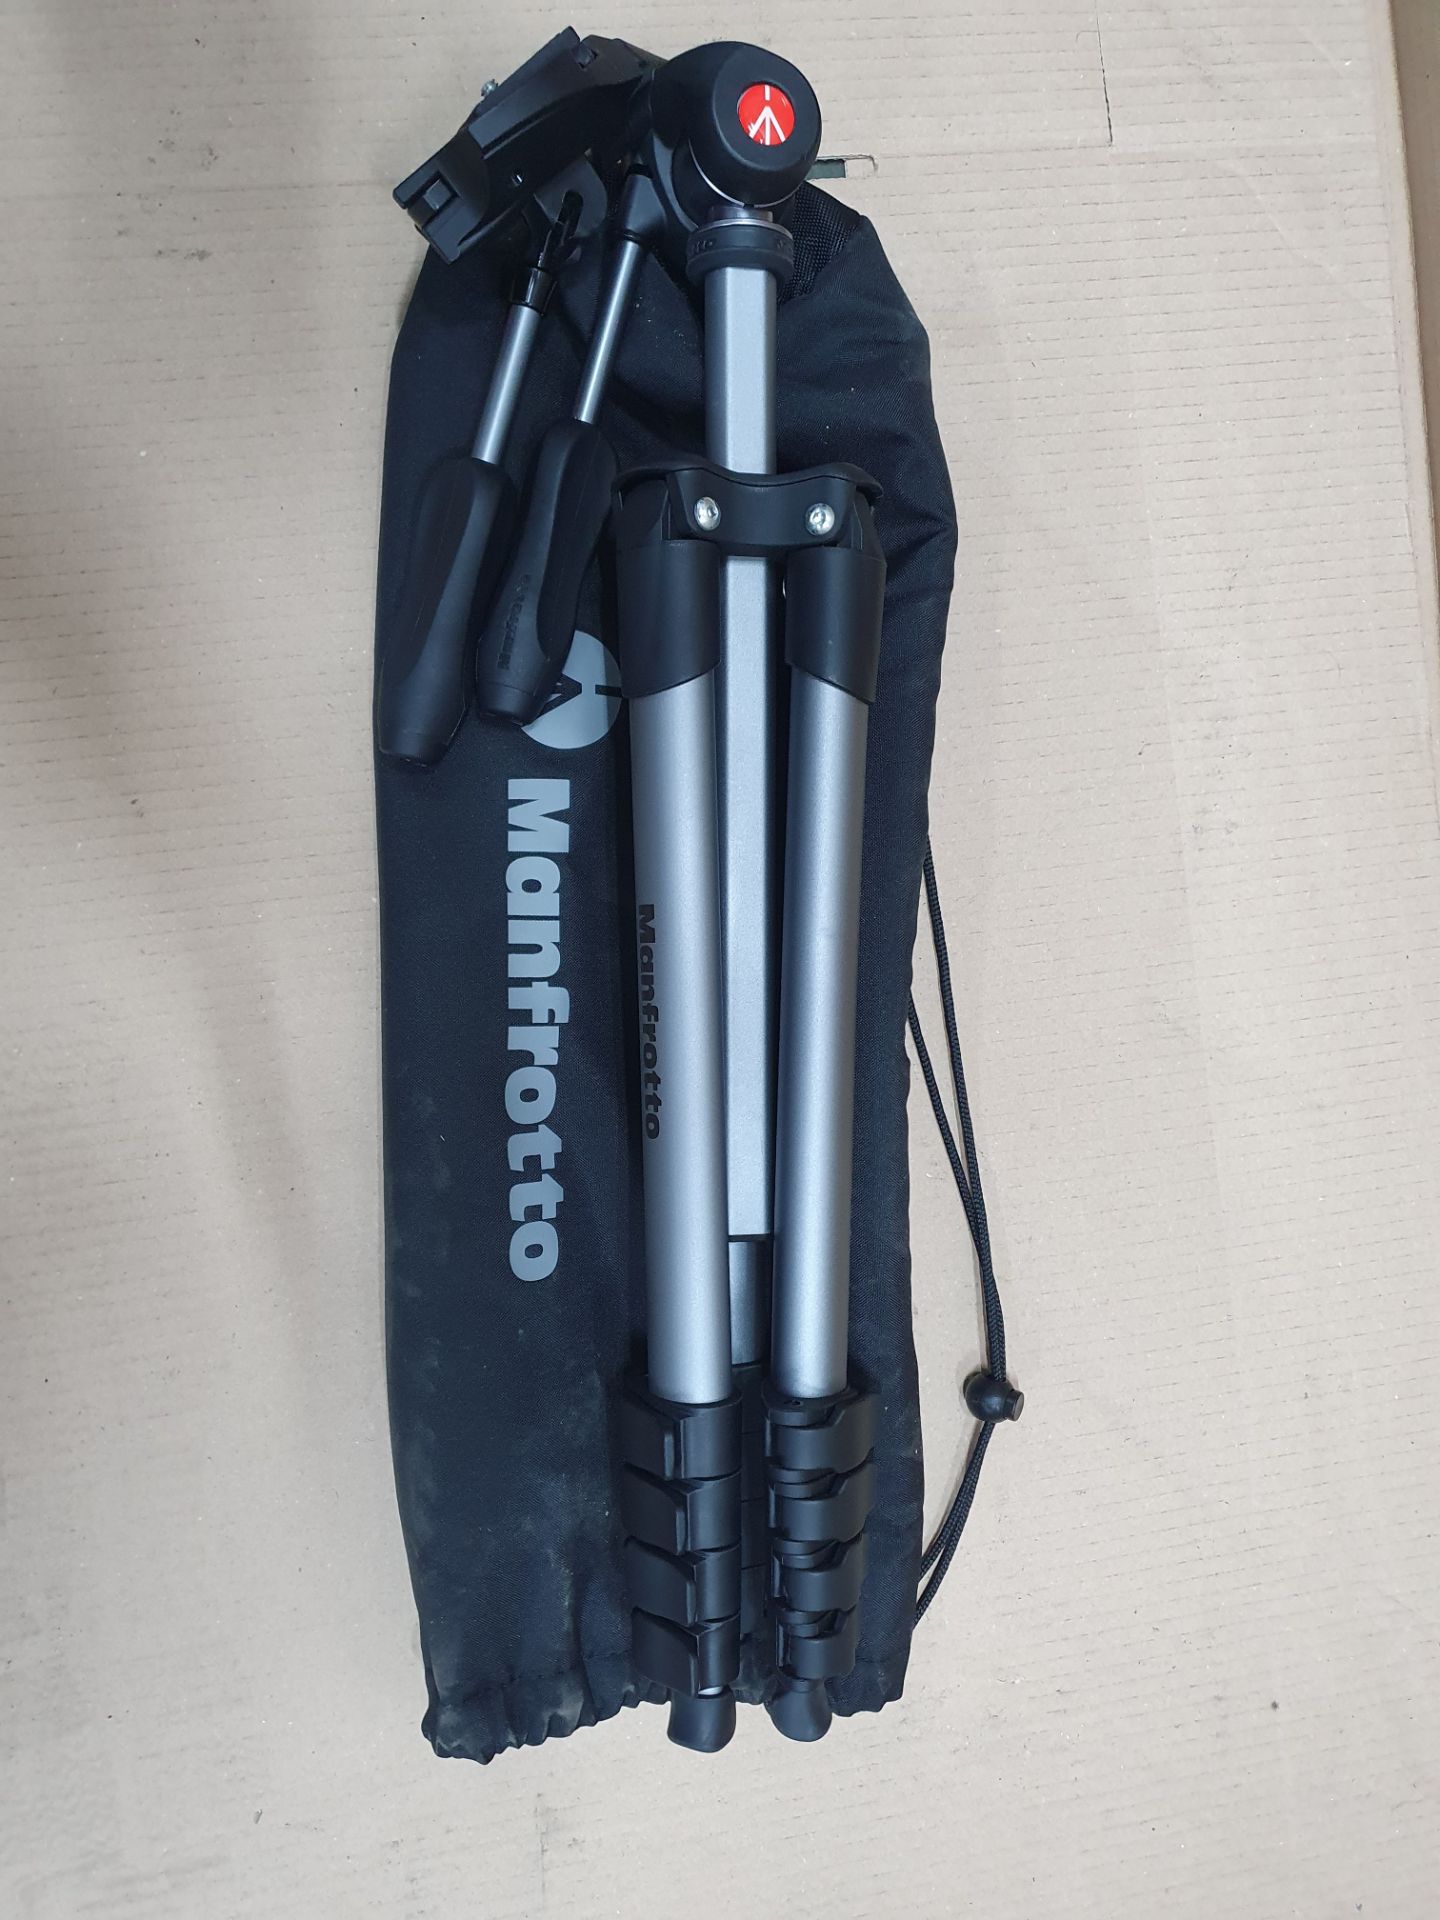 Monfrotto Extendable Camera Tripod with Carry Bag - Image 7 of 7